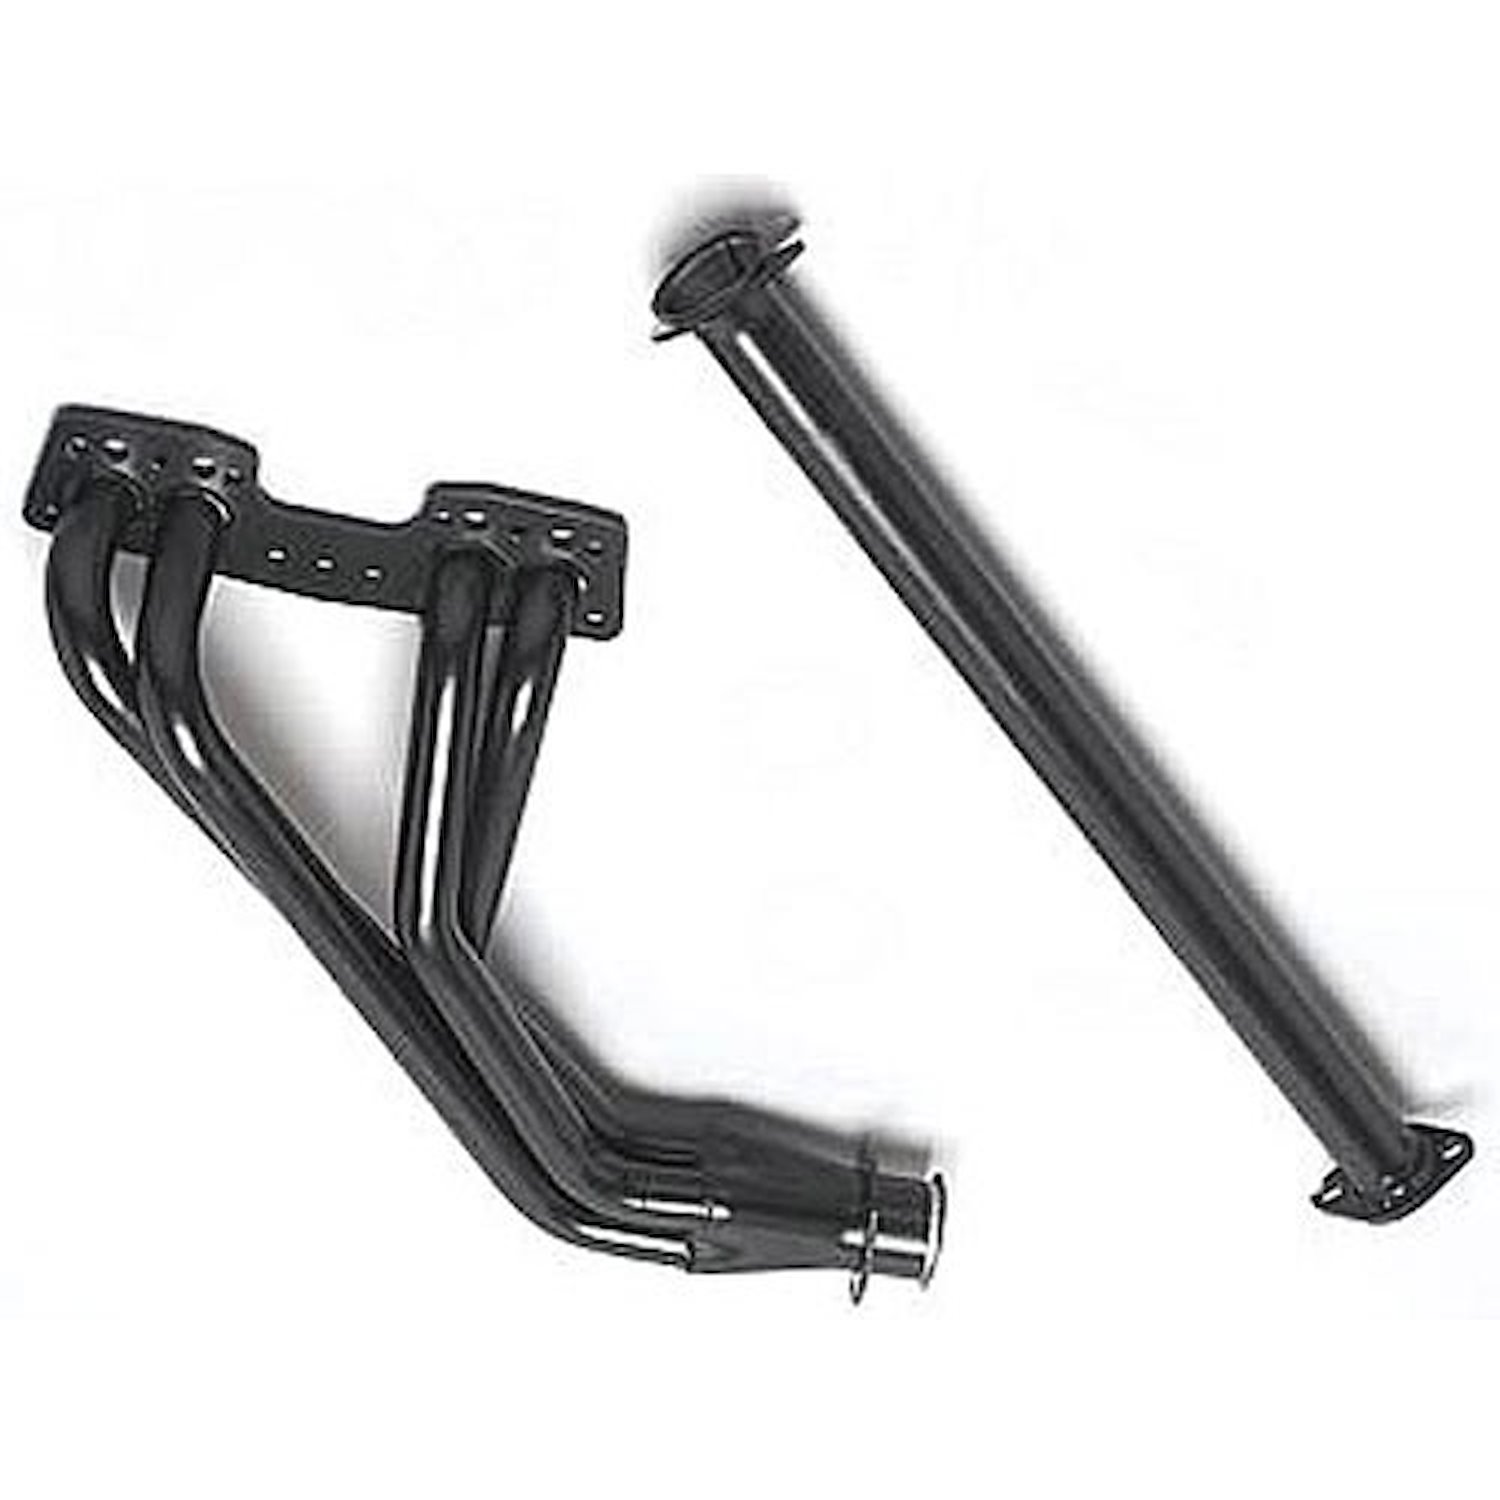 Painted Truck Header 1984-89 Pickup 2WD/4WD and 4Runner 2.2L/2.4L 5-speed Only